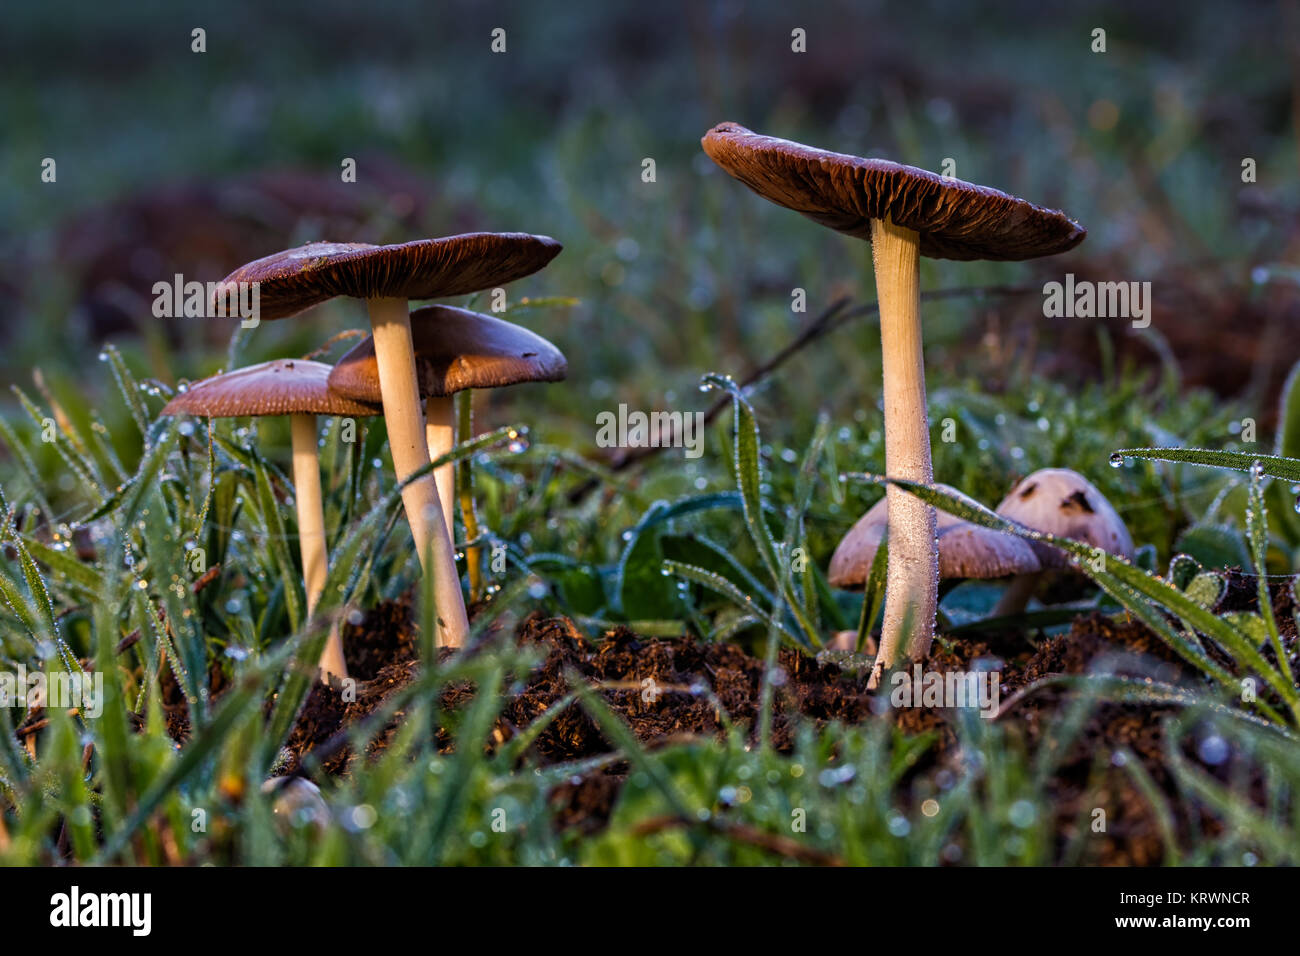 Mushrooms photographed in their natural environment. Stock Photo